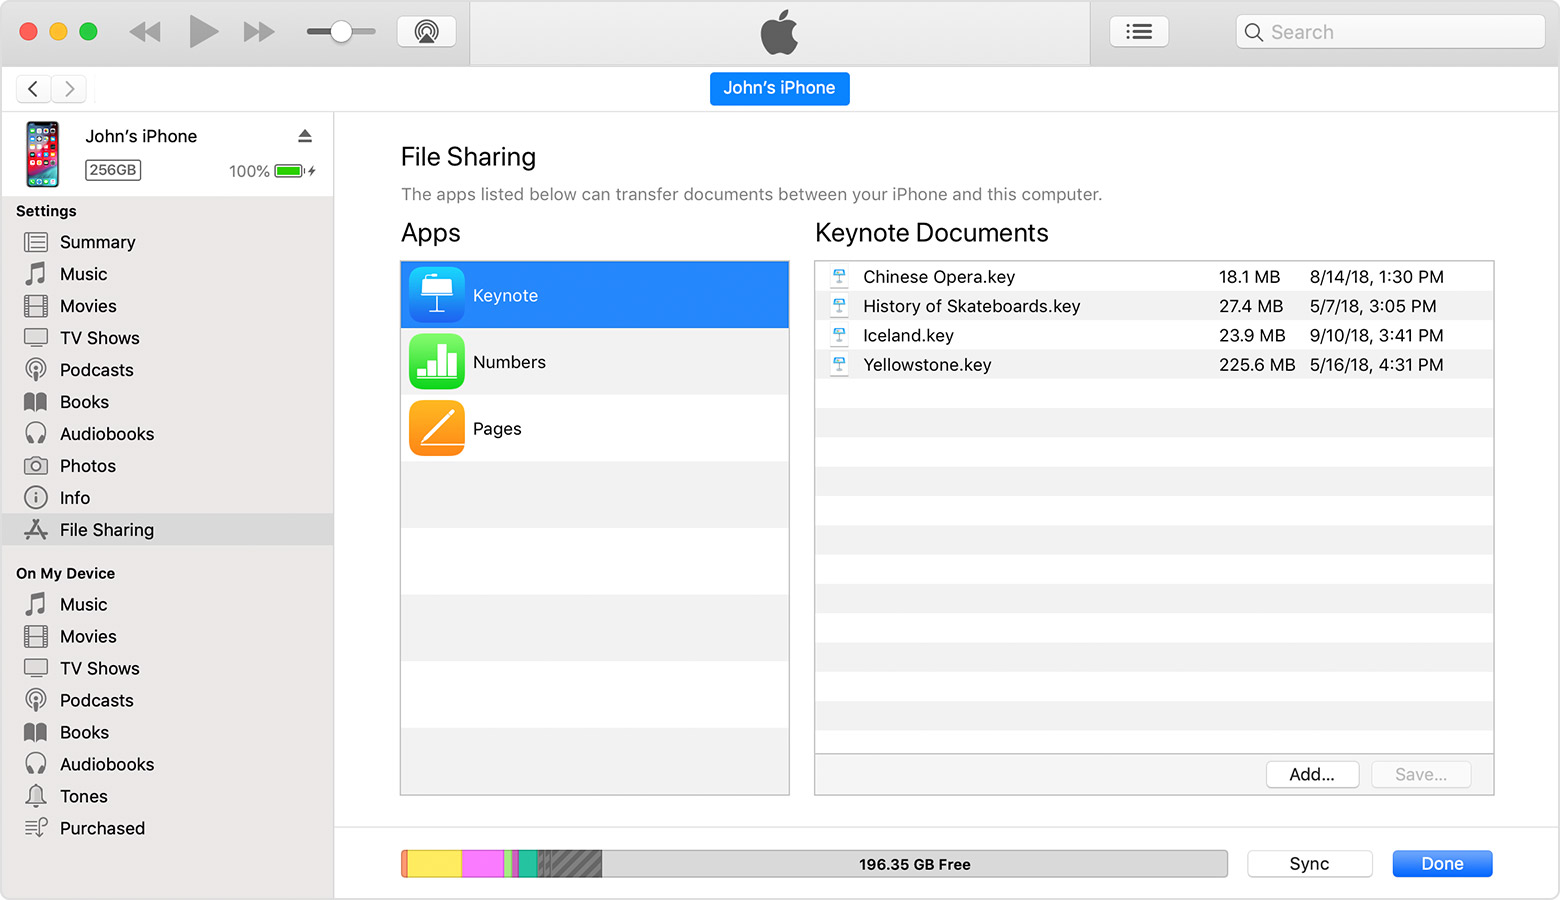 How To Manage Apps In Itunes On Mac